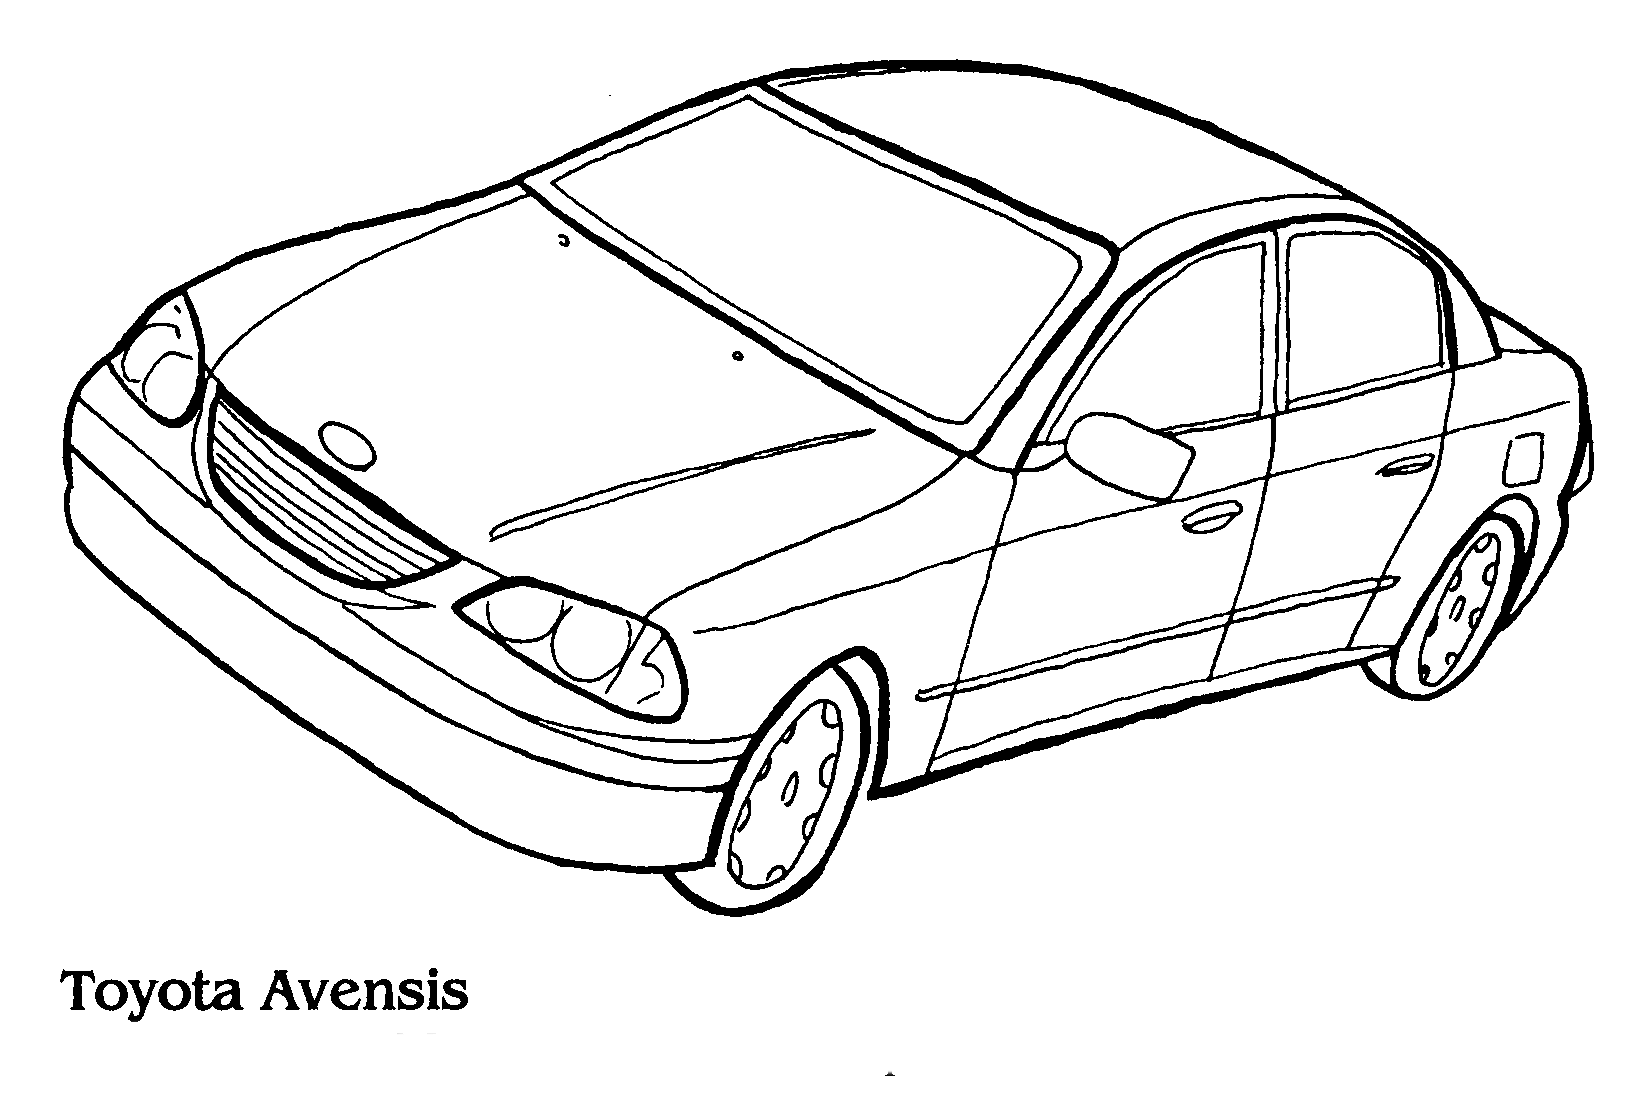 Coloring page - Toyota Avensis